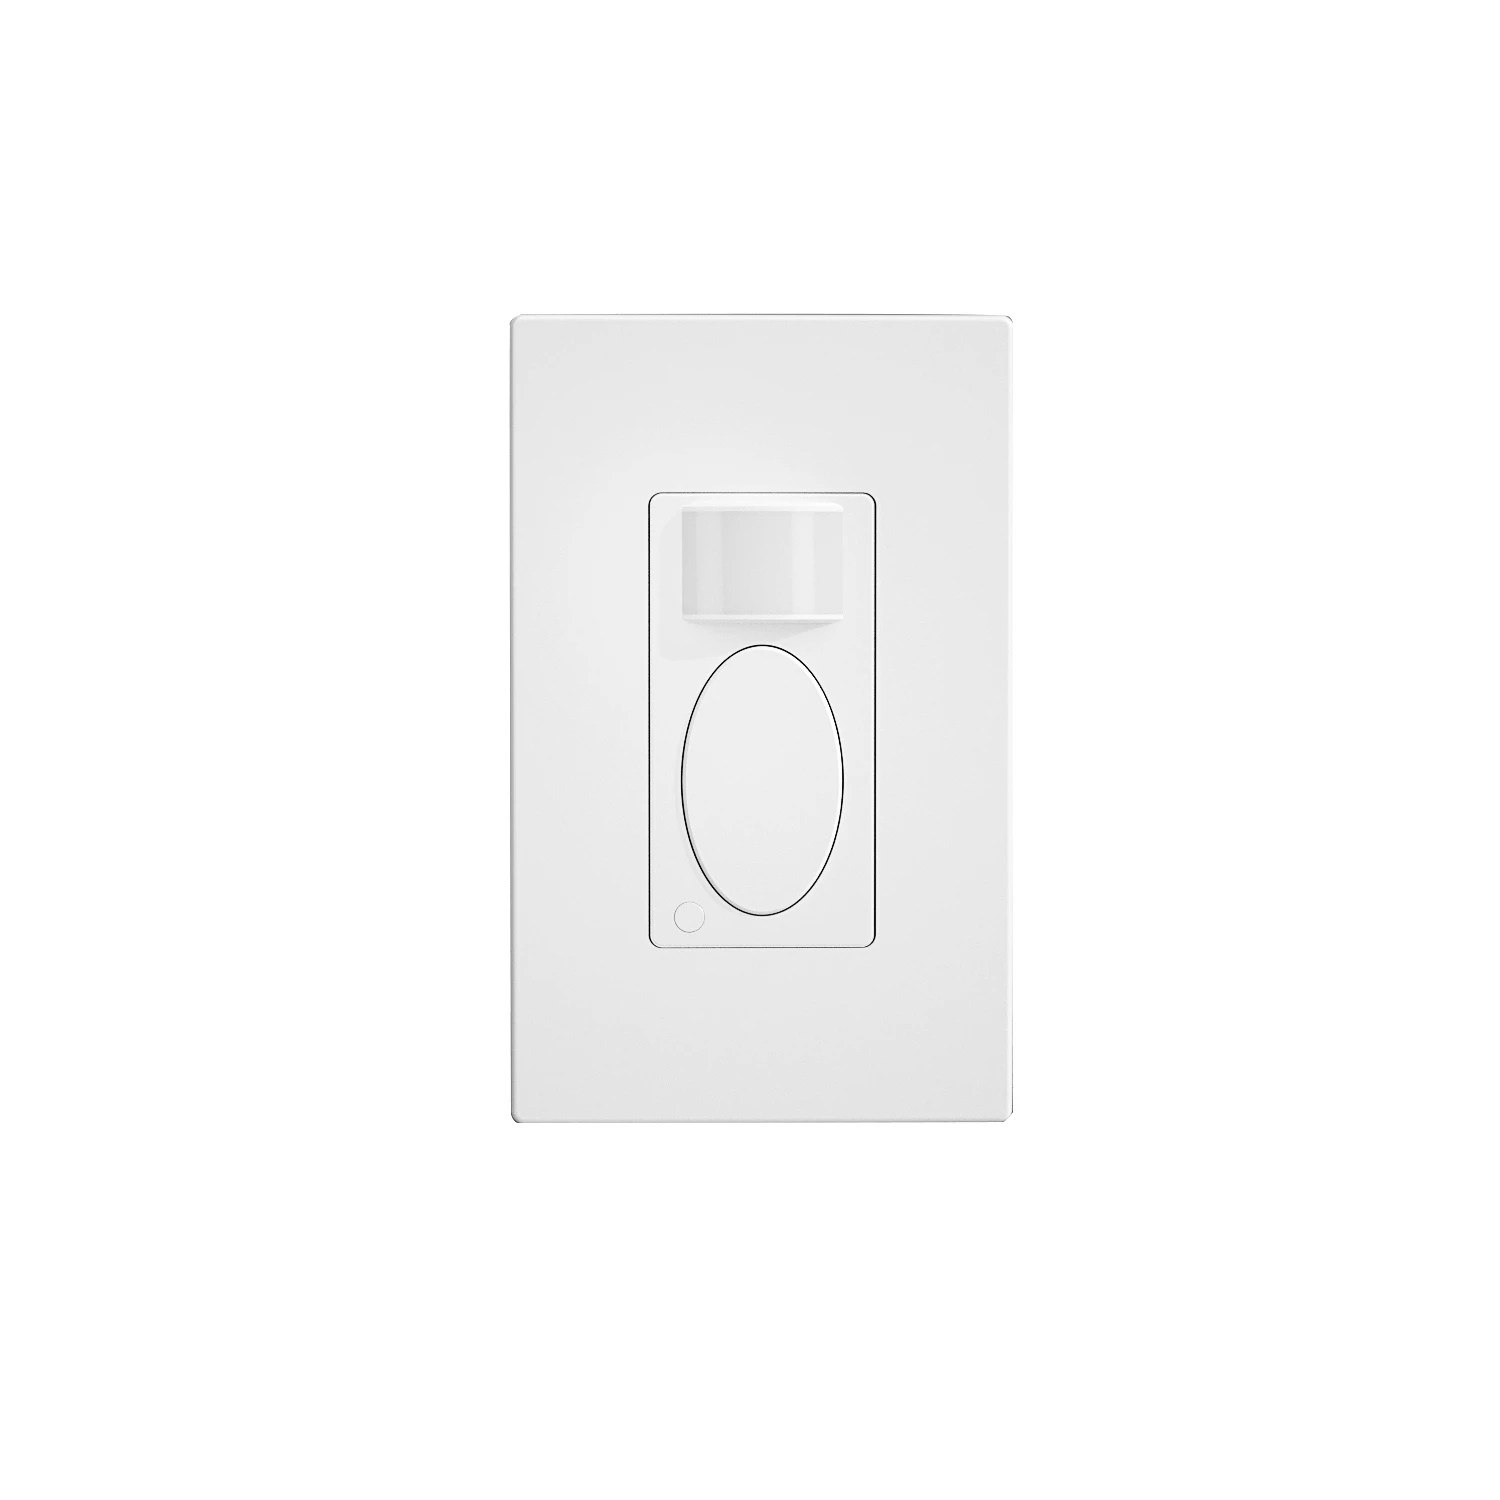 American Standard General purpose wall light dimmer module switch with power source 110V-285VAC